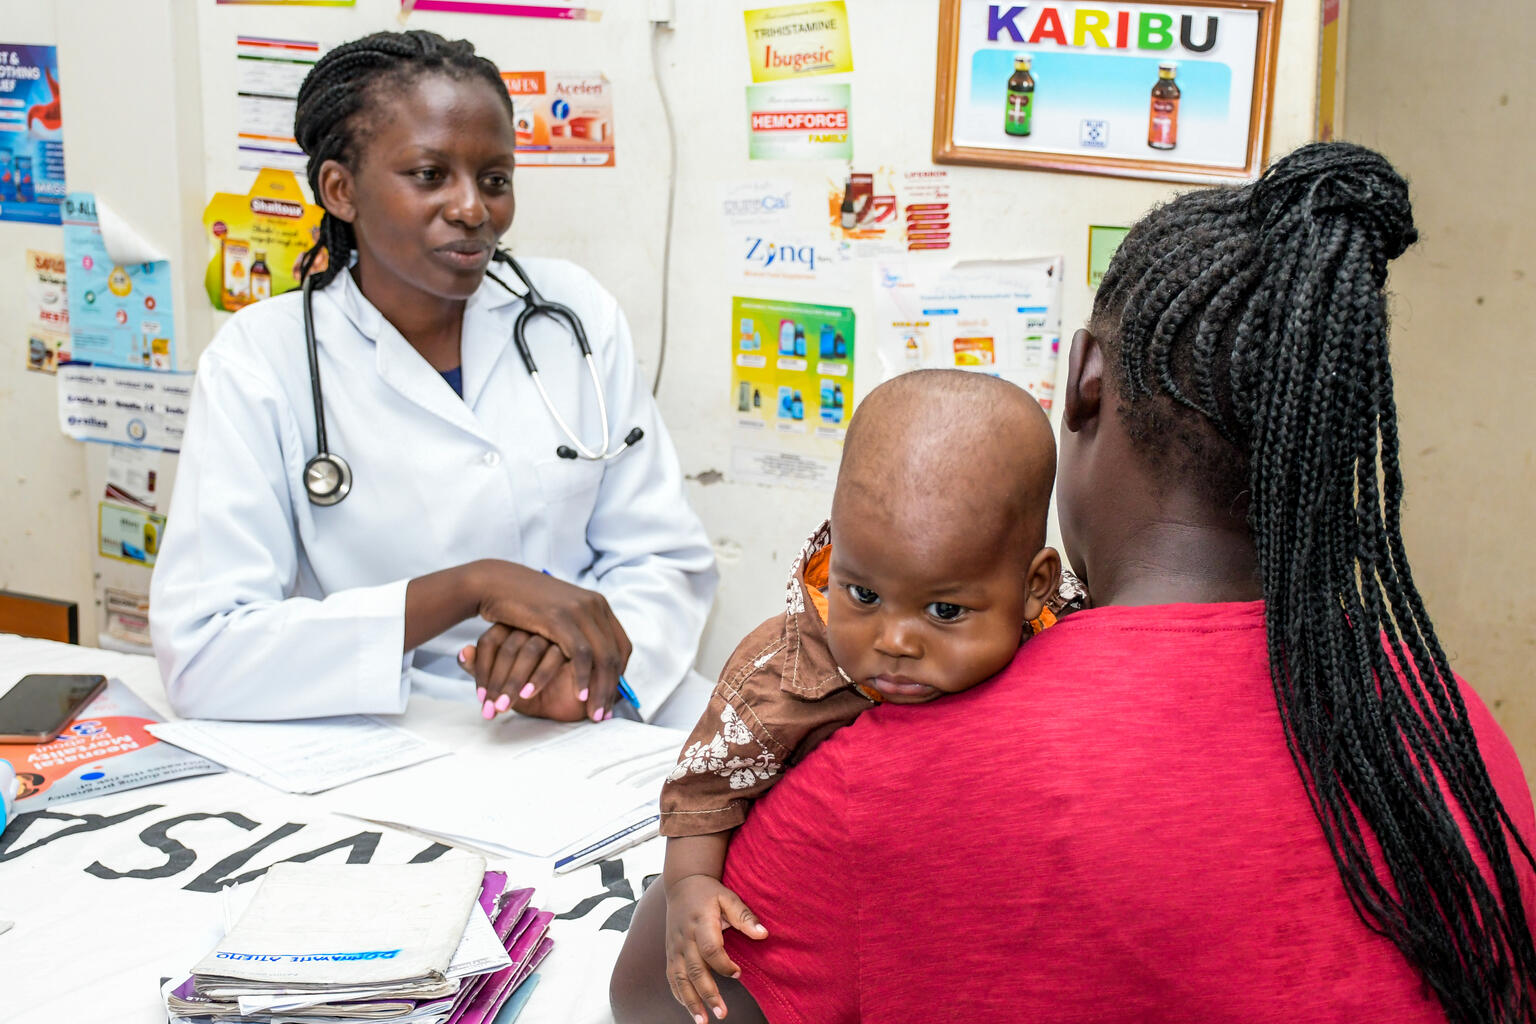 On 24 November 2023 in Kenya, 6-month-old Adrian Steve Biko looks over the shoulder of his mother, Idah Achieng, as she speaks to a health worker at Kisumu County Referral Hospital. Adrian has just been vaccinated against malaria.